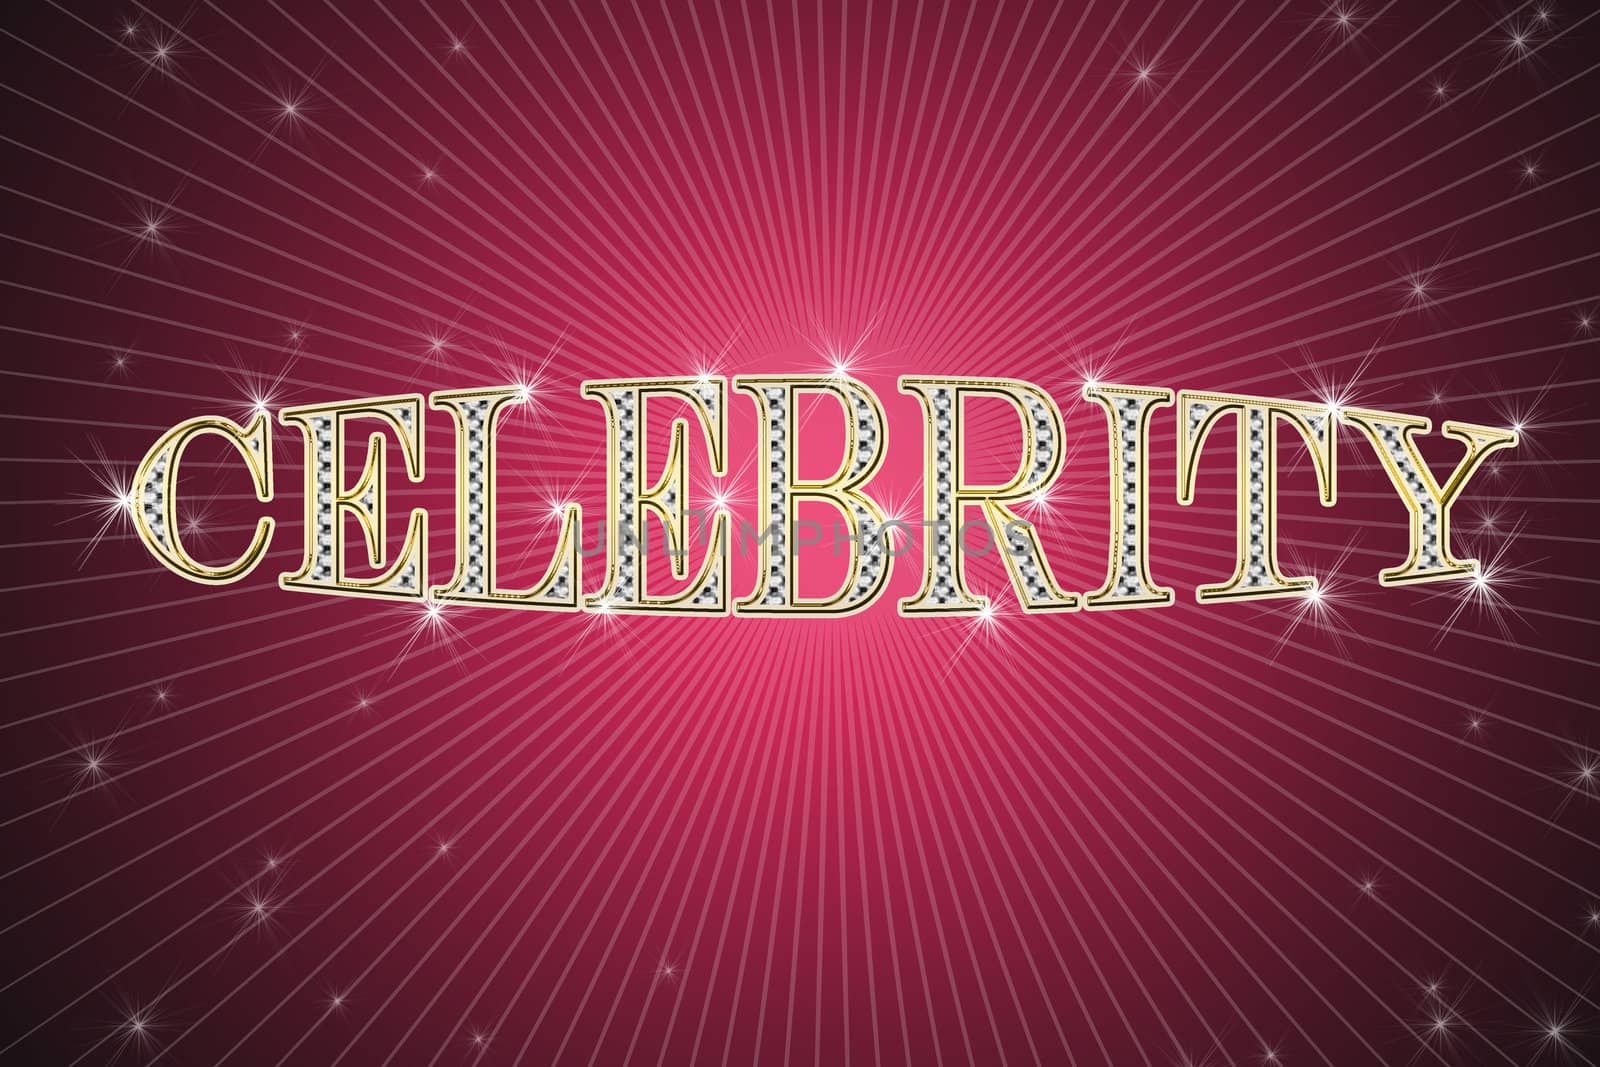 golden sign, written word celebrity on red background with stars